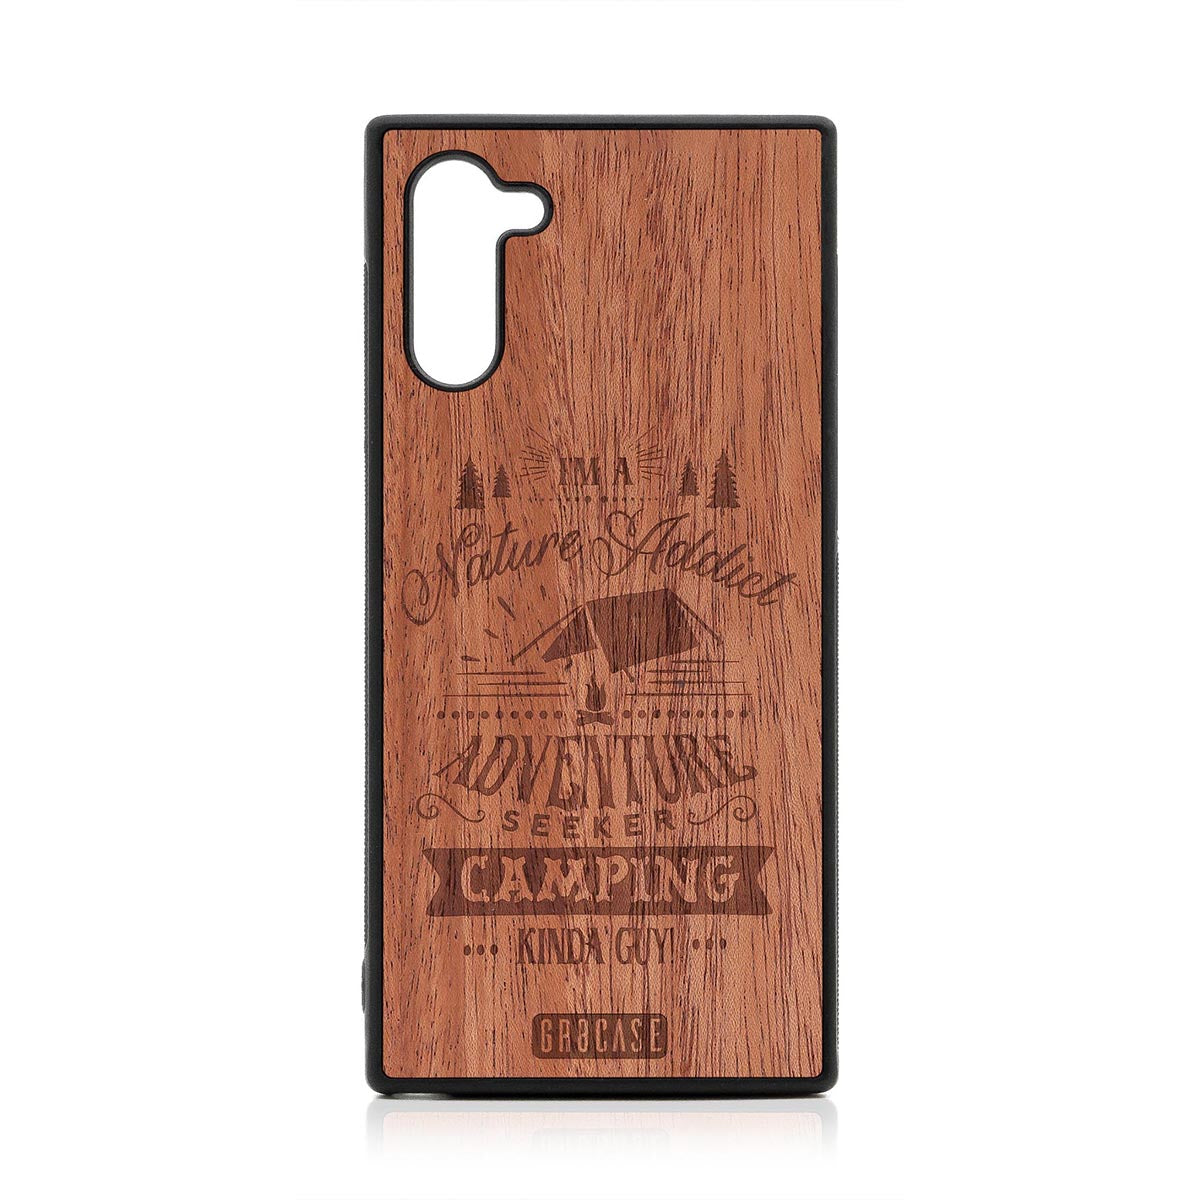 I'm A Nature Addict Adventure Seeker Camping Kinda Guy Design Wood Case Samsung Galaxy Note 10 by GR8CASE